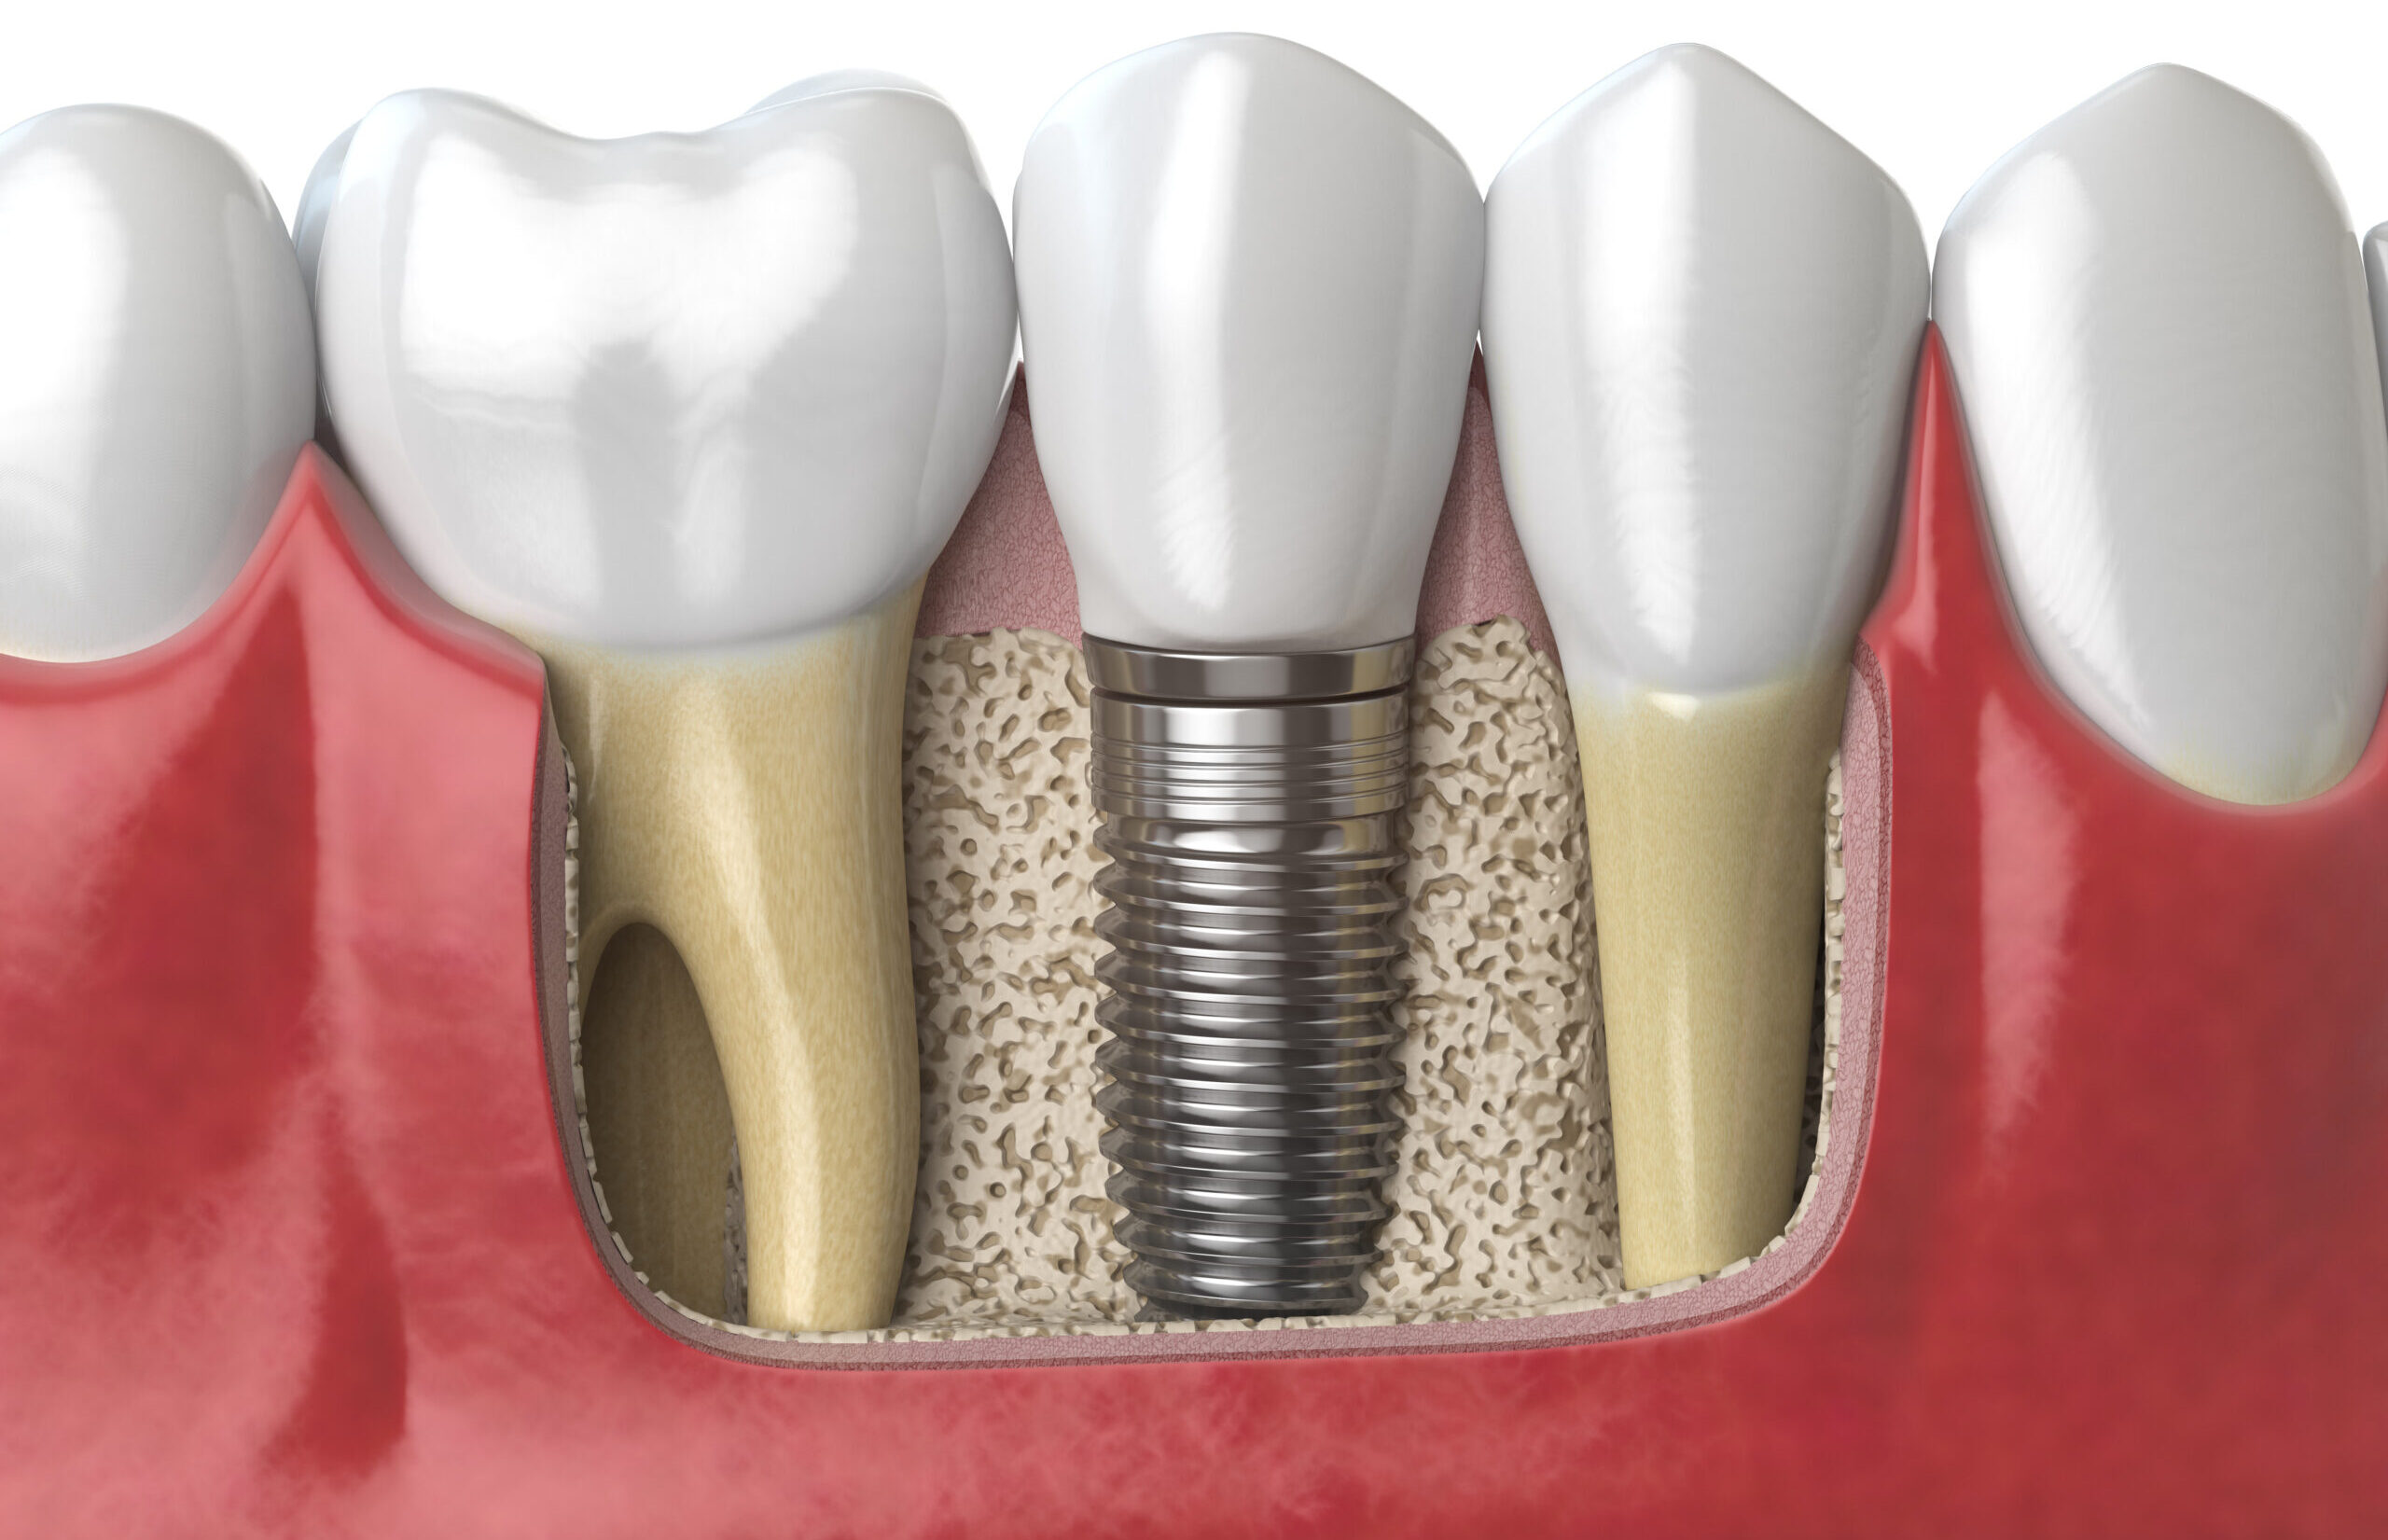 anatomy of healthy teeth and tooth dental implant PAF6ZMW scaled e1615819547276